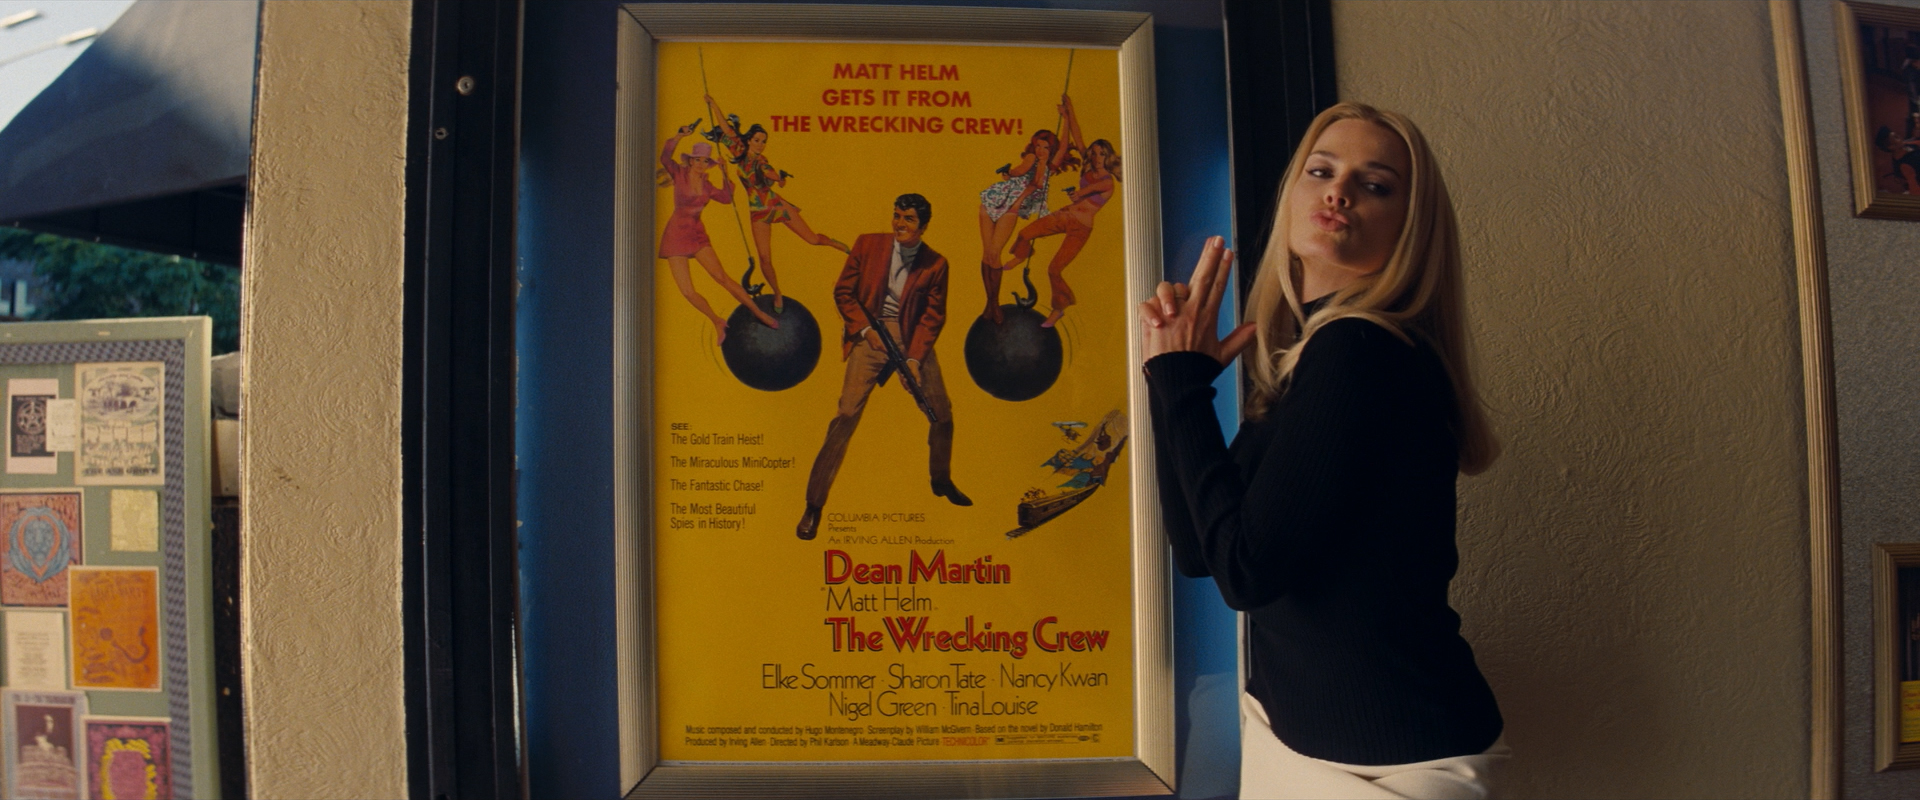 People 1920x800 Margot Robbie women actress blonde movies film stills movie poster hand gesture Once Upon a Time in Hollywood Quentin Tarantino Sharon Tate duckface finger gun